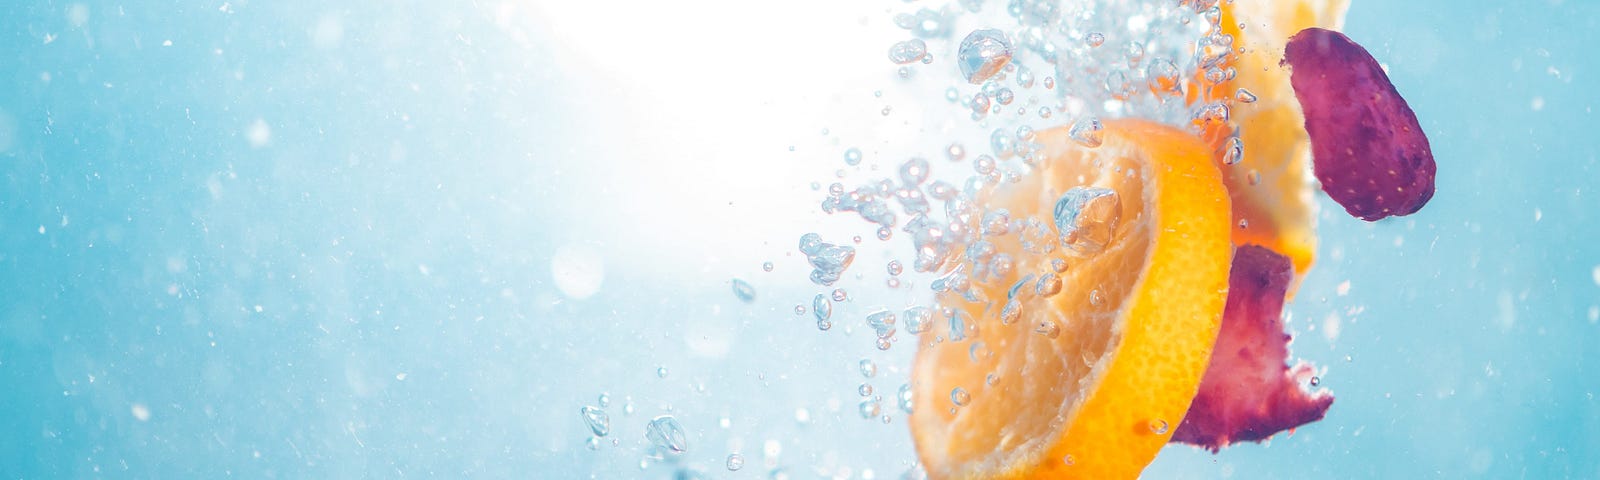 Slices of an orange and strawberries splashing into a glass of sparkling water.